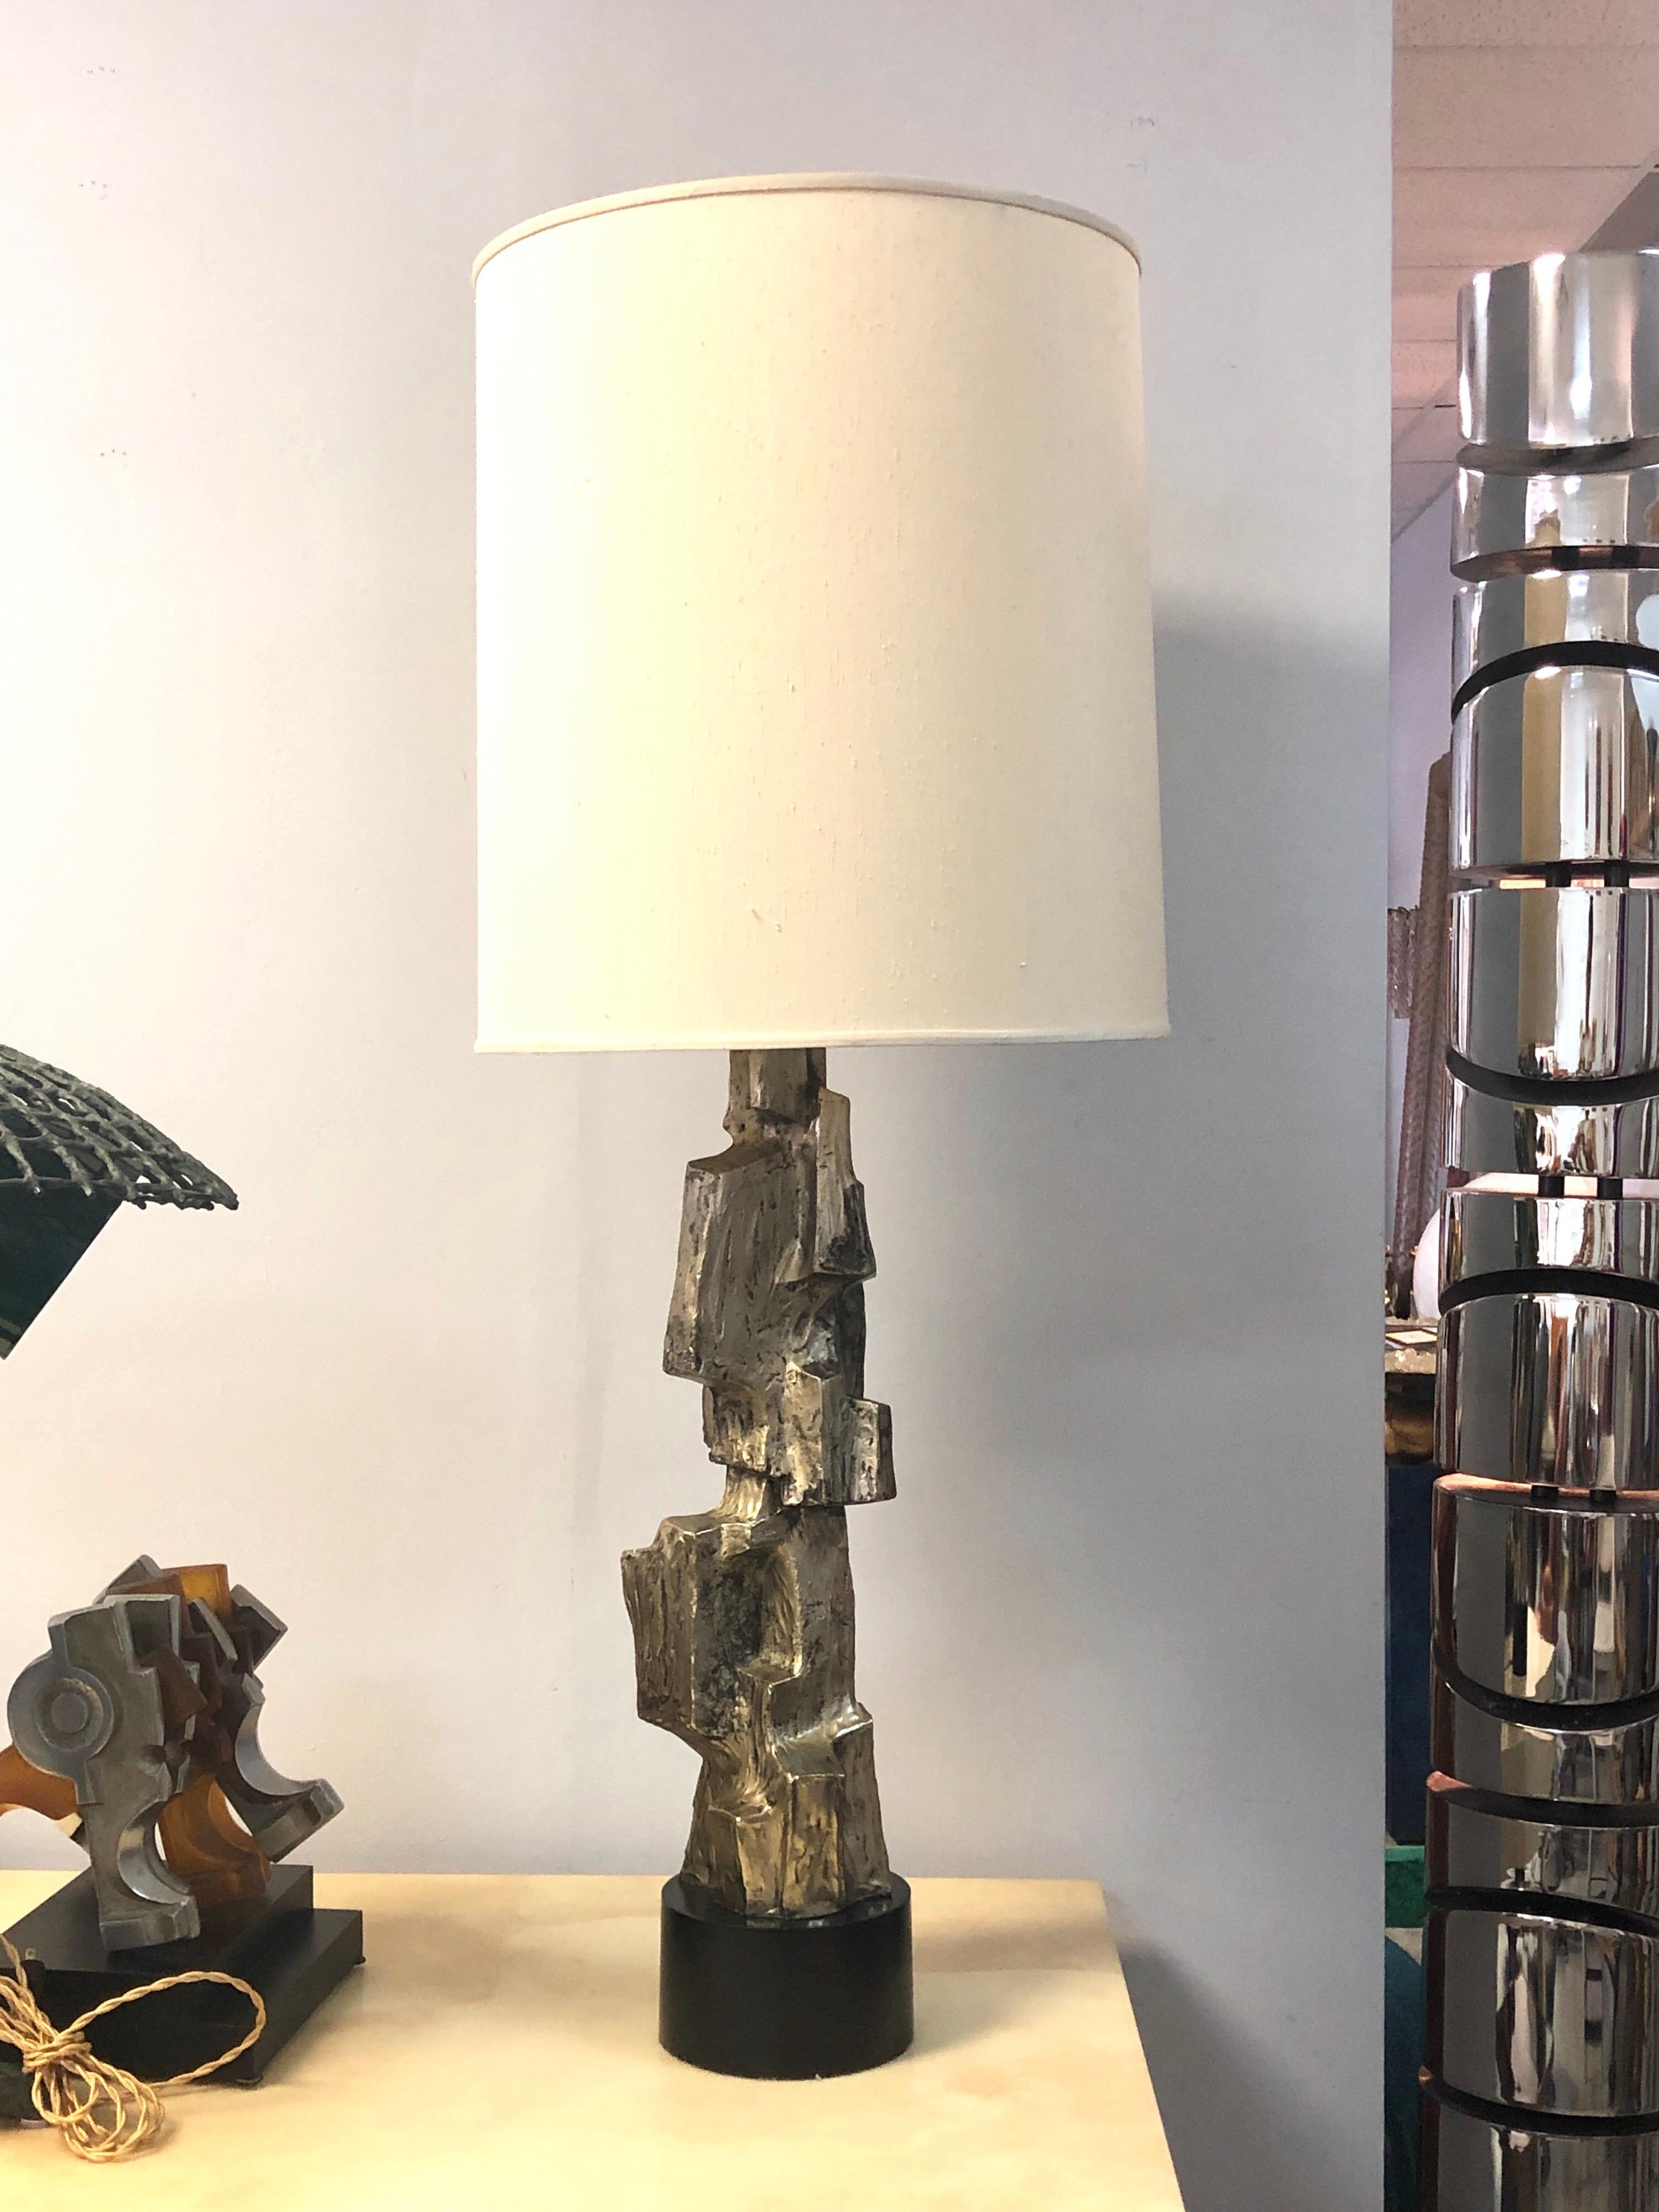 A large sculptural lamp by Laurel. Not the usual brown finish, this one has an old silver look. Retains original shade and finial.